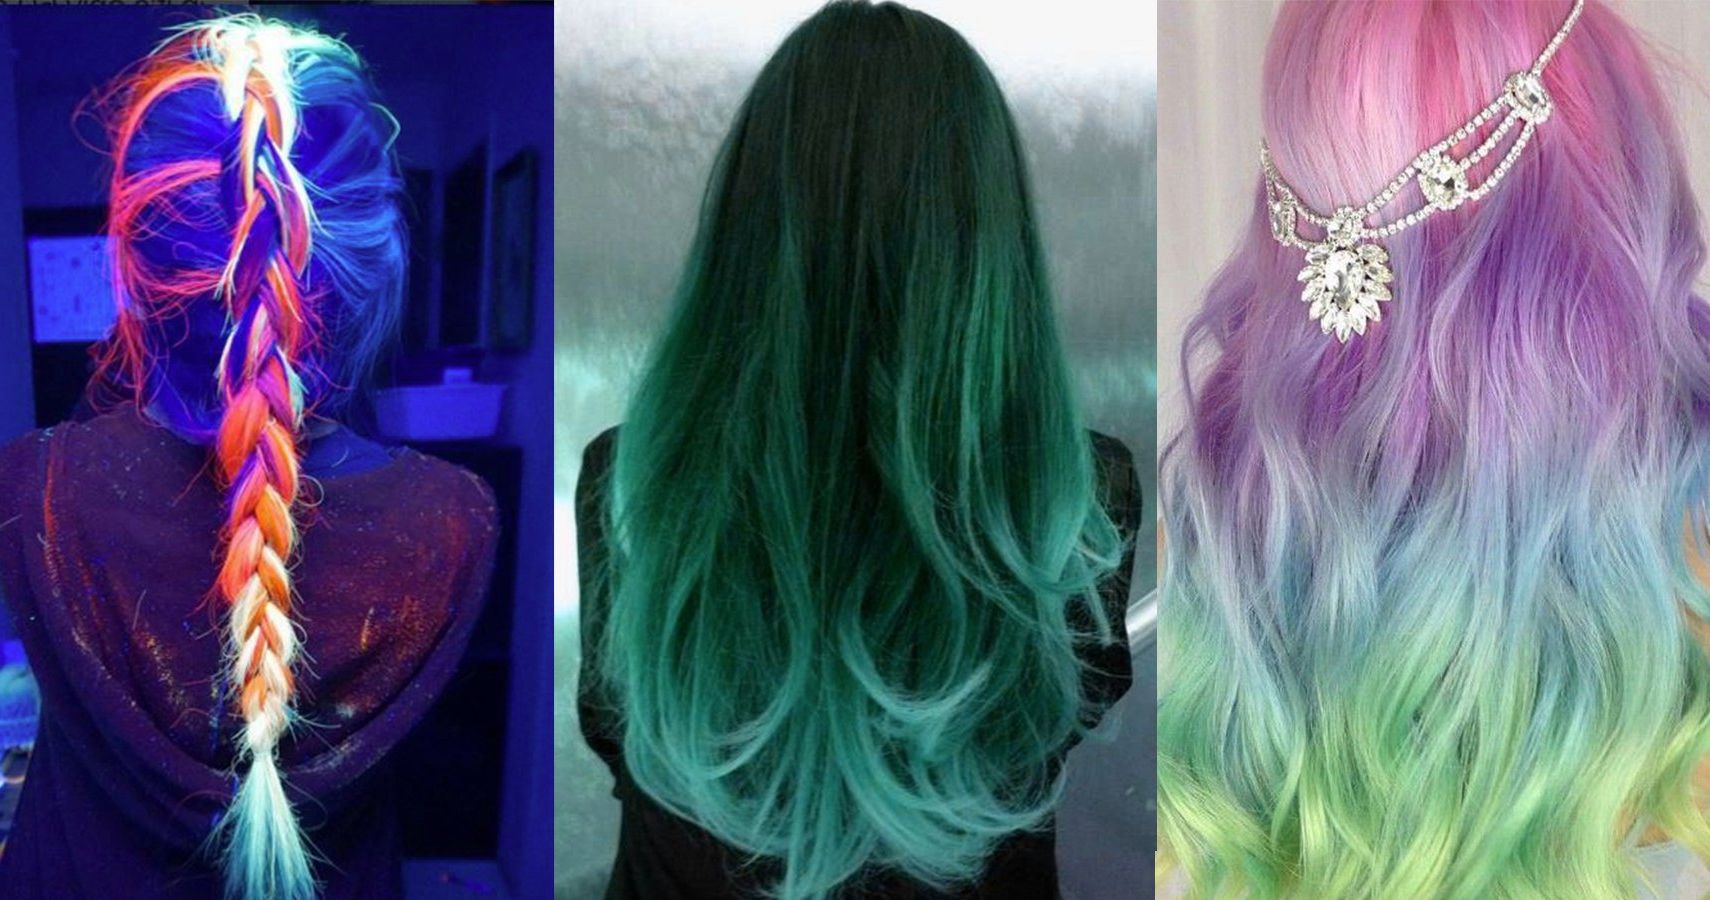 Widely Used Cotton Candy Colors Blend Mermaid Braid Hairstyles Throughout 15 Of The Most Breathtakingly Beautiful "mermaid" Hair Colors (View 8 of 20)